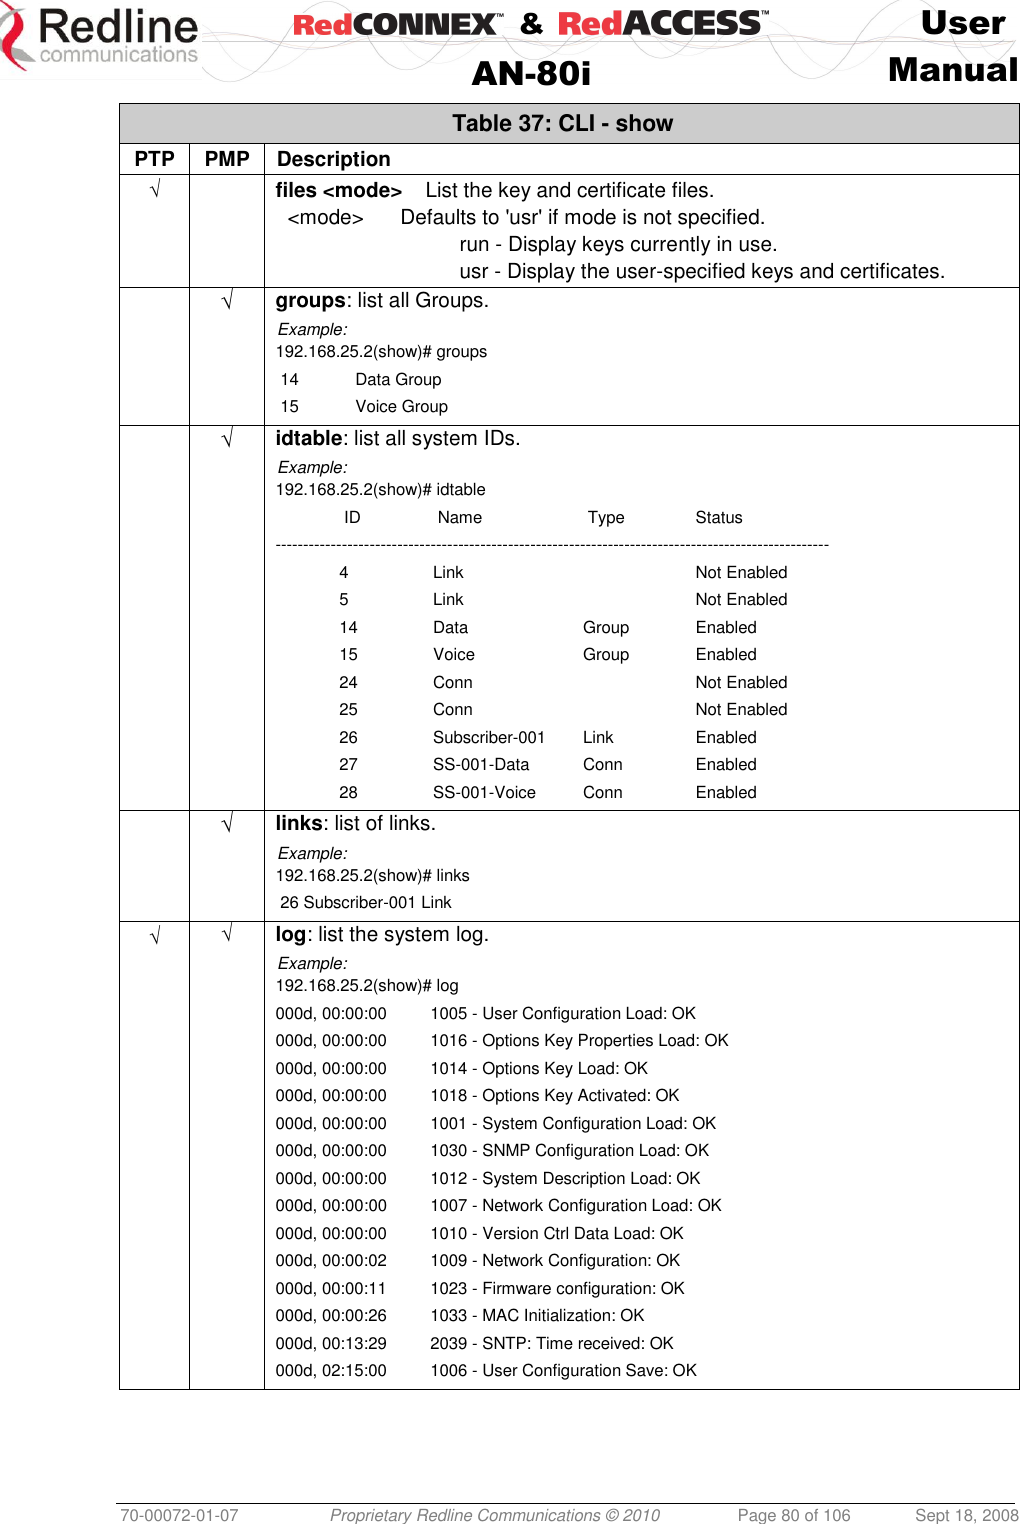    &amp;  User  AN-80i Manual  70-00072-01-07 Proprietary Redline Communications © 2010  Page 80 of 106  Sept 18, 2008 Table 37: CLI - show PTP PMP Description √  files &lt;mode&gt;  List the key and certificate files. &lt;mode&gt;  Defaults to &apos;usr&apos; if mode is not specified.   run - Display keys currently in use.   usr - Display the user-specified keys and certificates.  √ groups: list all Groups. Example: 192.168.25.2(show)# groups  14   Data Group  15   Voice Group  √ idtable: list all system IDs. Example: 192.168.25.2(show)# idtable    ID   Name   Type  Status ----------------------------------------------------------------------------------------------------   4  Link    Not Enabled   5  Link    Not Enabled  14  Data  Group  Enabled  15  Voice  Group  Enabled  24  Conn    Not Enabled  25  Conn    Not Enabled  26  Subscriber-001  Link  Enabled  27 SS-001-Data  Conn  Enabled  28 SS-001-Voice  Conn  Enabled  √ links: list of links. Example: 192.168.25.2(show)# links  26 Subscriber-001 Link √ √ log: list the system log. Example: 192.168.25.2(show)# log 000d, 00:00:00   1005 - User Configuration Load: OK 000d, 00:00:00   1016 - Options Key Properties Load: OK 000d, 00:00:00   1014 - Options Key Load: OK 000d, 00:00:00   1018 - Options Key Activated: OK 000d, 00:00:00   1001 - System Configuration Load: OK 000d, 00:00:00   1030 - SNMP Configuration Load: OK 000d, 00:00:00   1012 - System Description Load: OK 000d, 00:00:00   1007 - Network Configuration Load: OK 000d, 00:00:00   1010 - Version Ctrl Data Load: OK 000d, 00:00:02   1009 - Network Configuration: OK 000d, 00:00:11   1023 - Firmware configuration: OK 000d, 00:00:26   1033 - MAC Initialization: OK 000d, 00:13:29   2039 - SNTP: Time received: OK 000d, 02:15:00   1006 - User Configuration Save: OK 